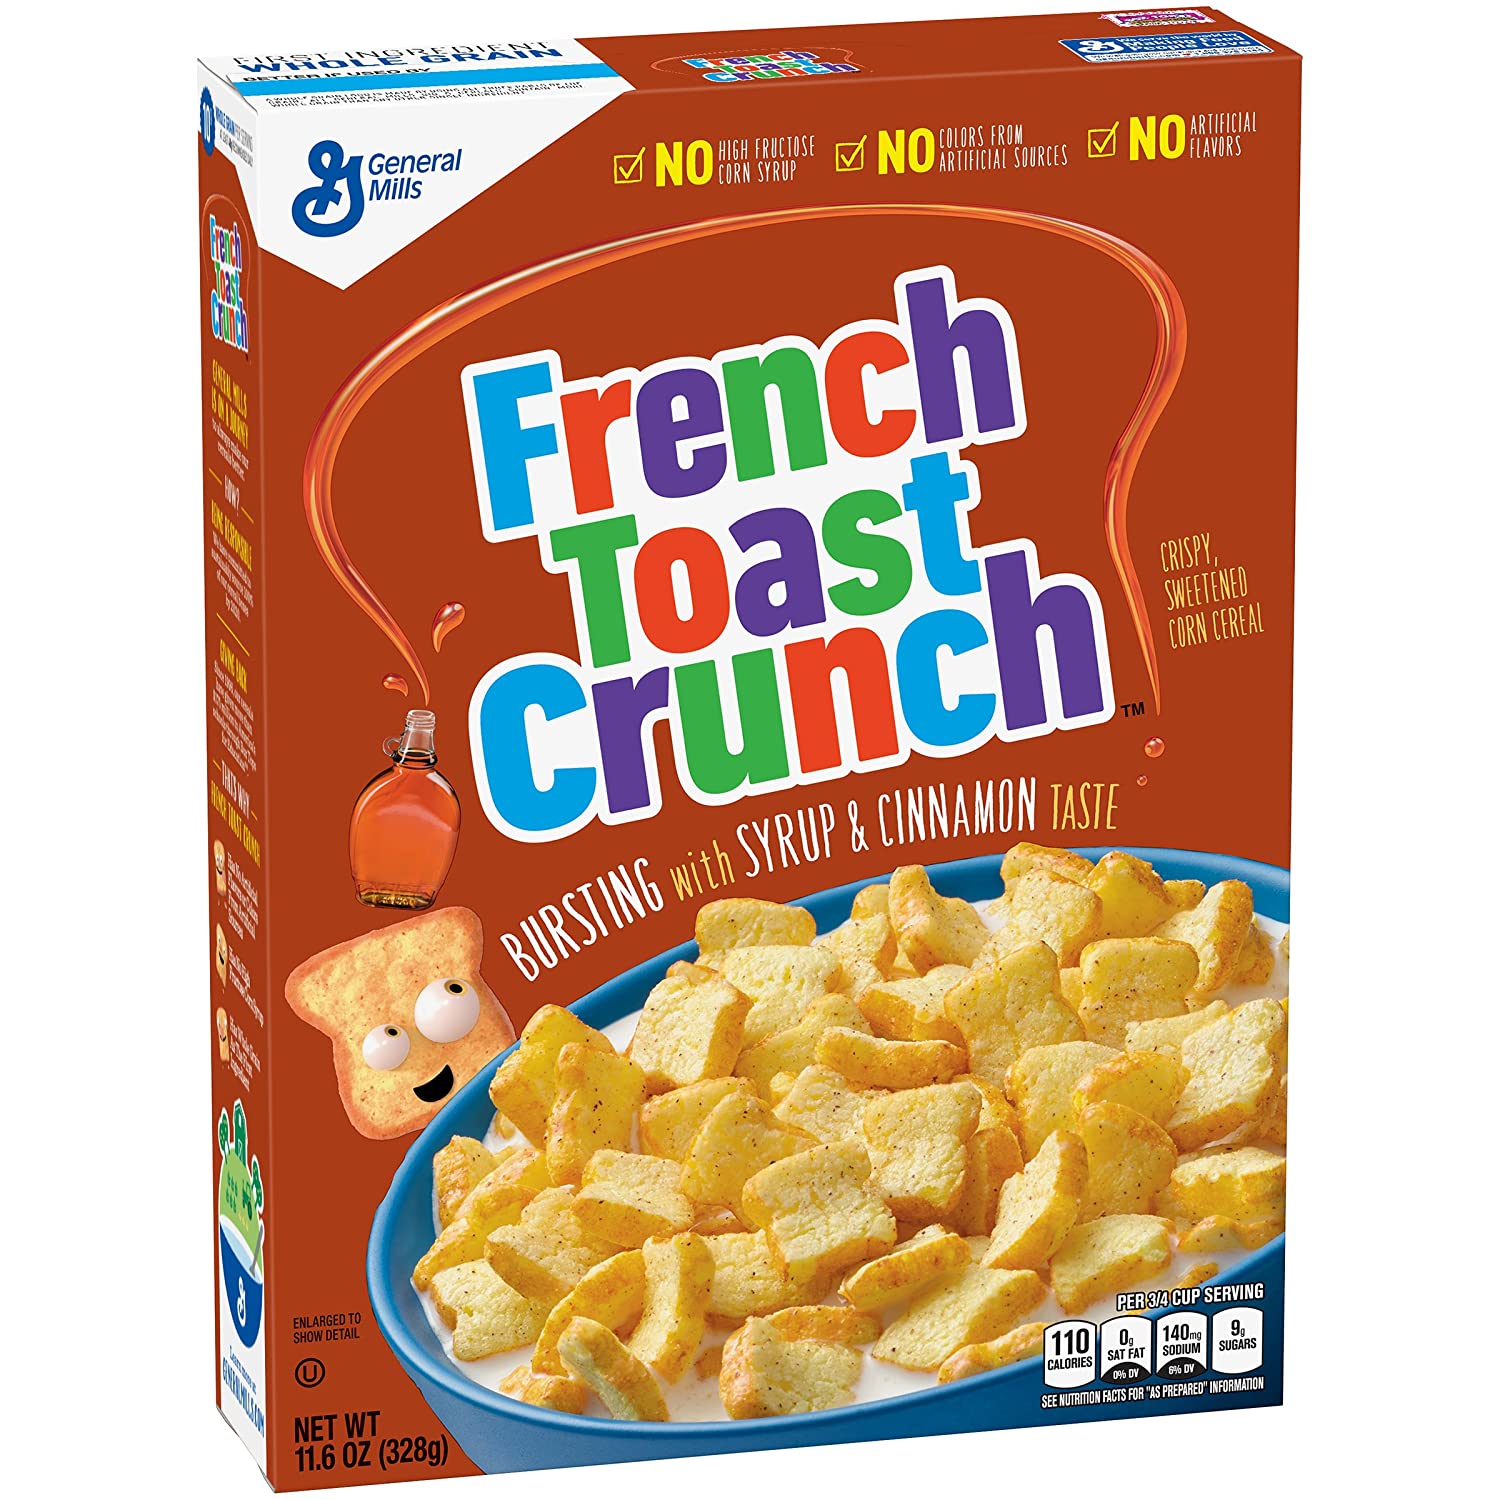 French Toast Crunch. They brought it back for a few months a number of years ago and I still check the cereal aisle every time I'm at the grocery store. -u/kiodo99